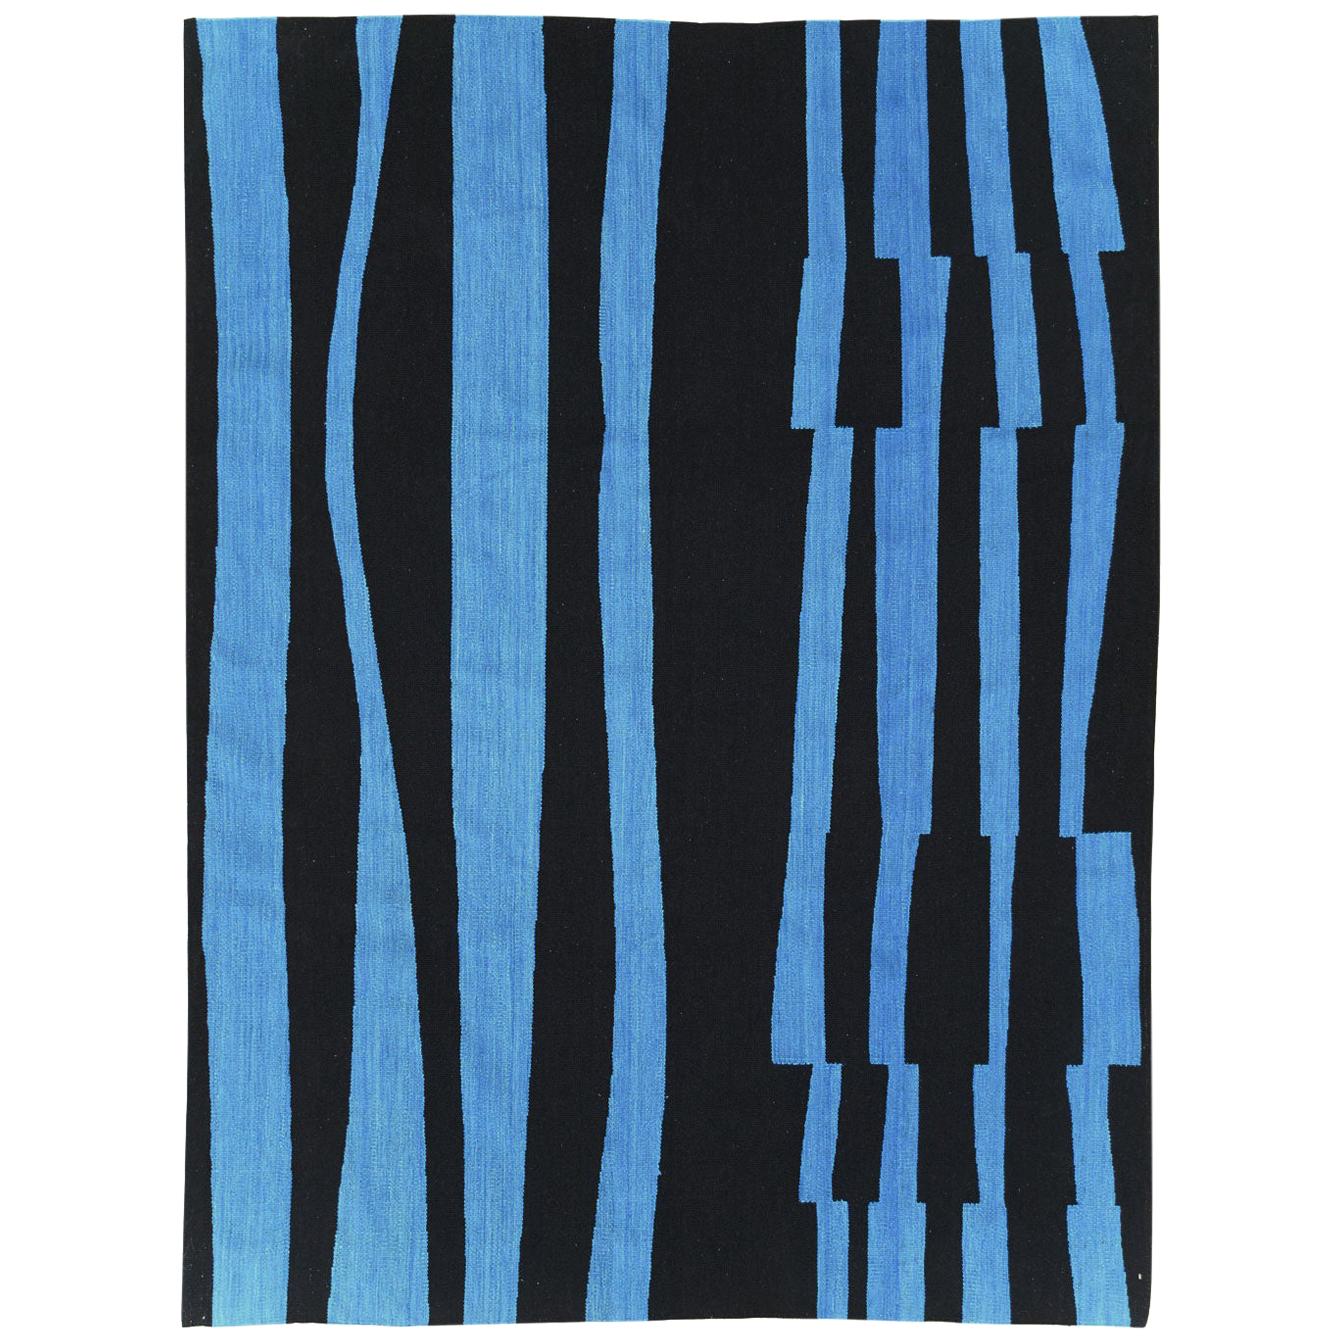 A modern Turkish flatweave Kilim accent rug handmade during the 21st century with a modern design in black and blue.

Measures: 6' 5